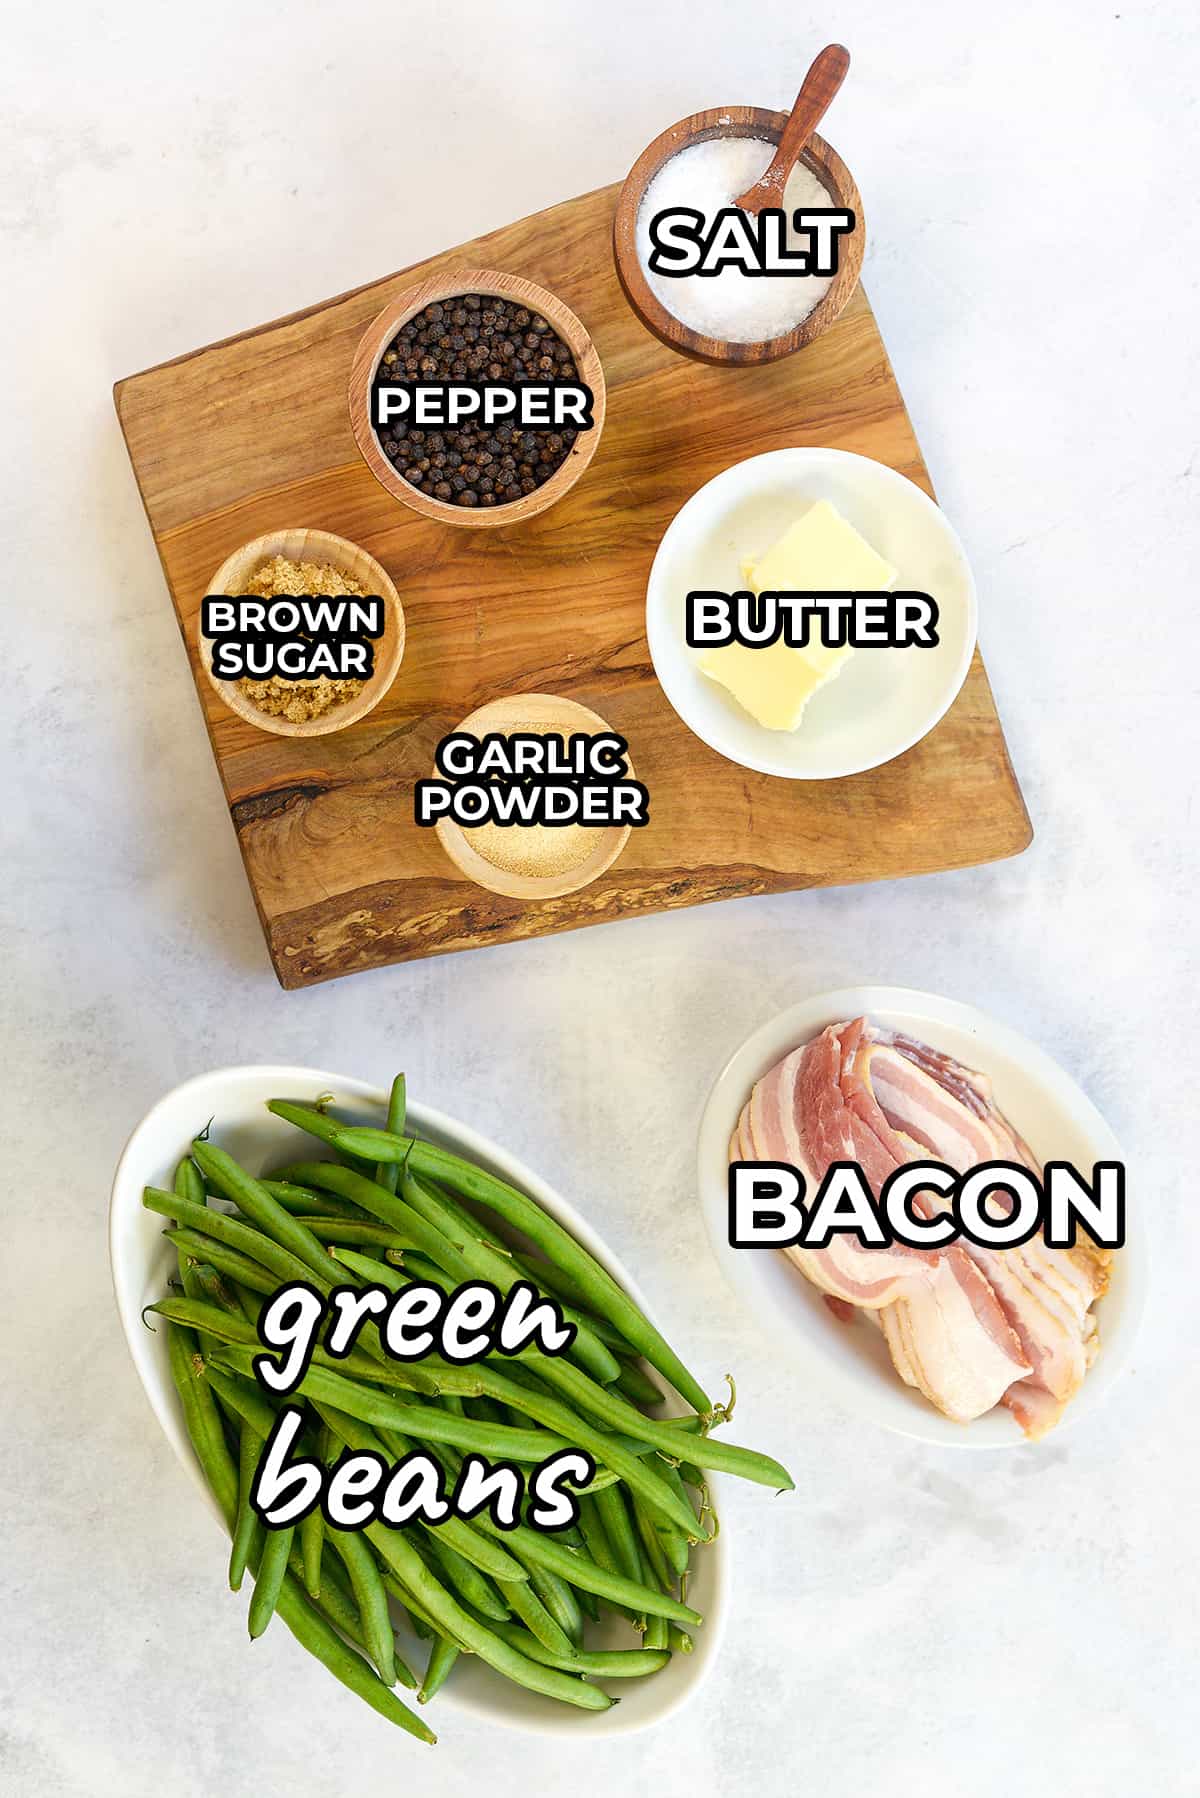 Ingredients for bacon wrapped green beans recipe.